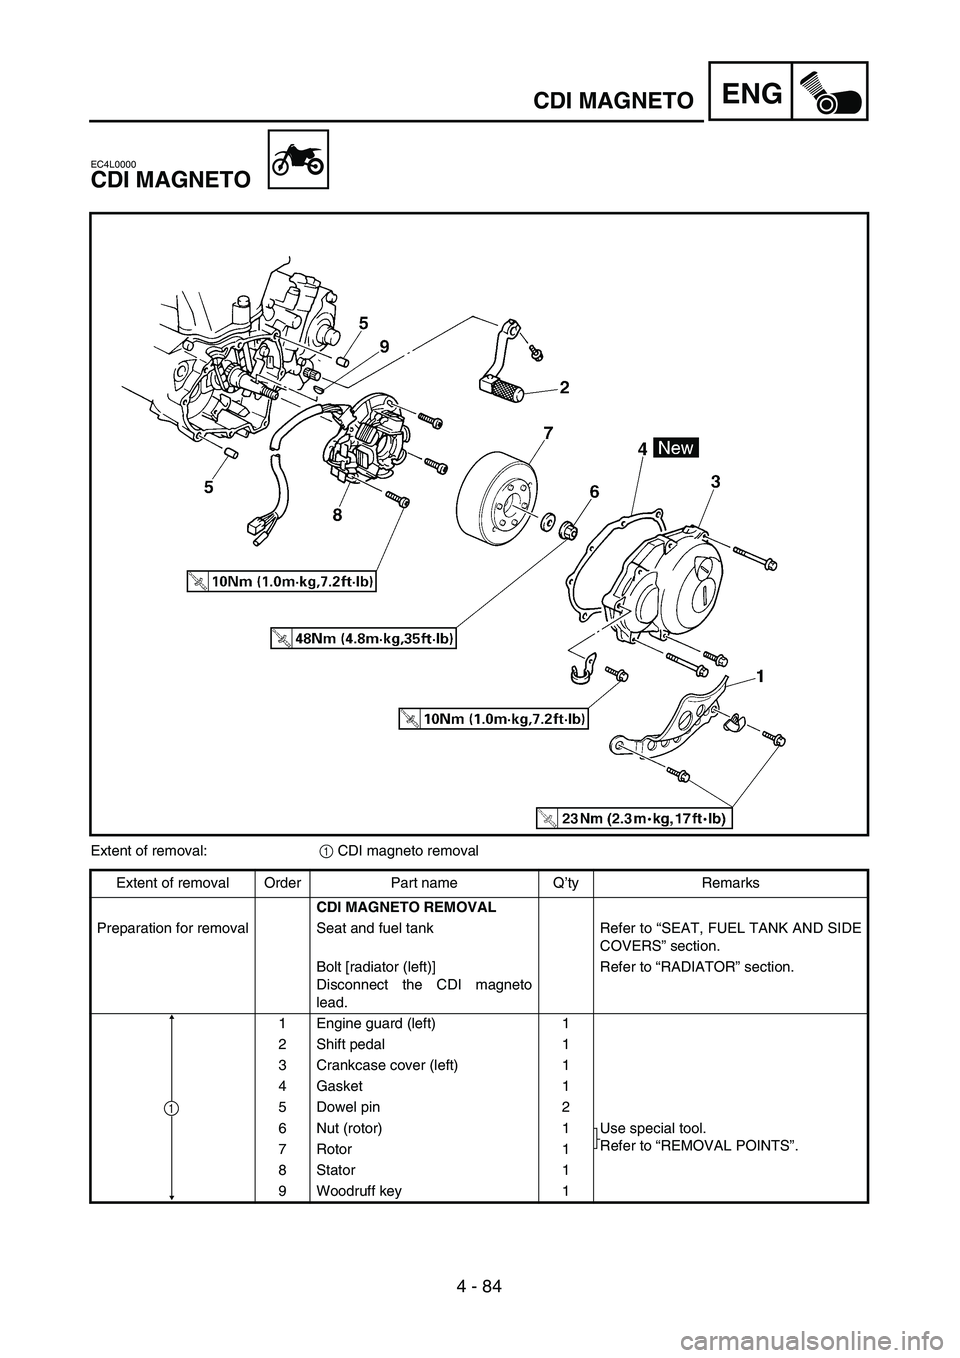 YAMAHA WR 426F 2002  Manuale de Empleo (in Spanish) ENG
4 - 84
CDI MAGNETO
EC4L0000
CDI MAGNETO
Extent of removal:1 CDI magneto removal
Extent of removal Order Part name Q’ty Remarks
CDI MAGNETO REMOVAL
Preparation for removal Seat and fuel tank Refe